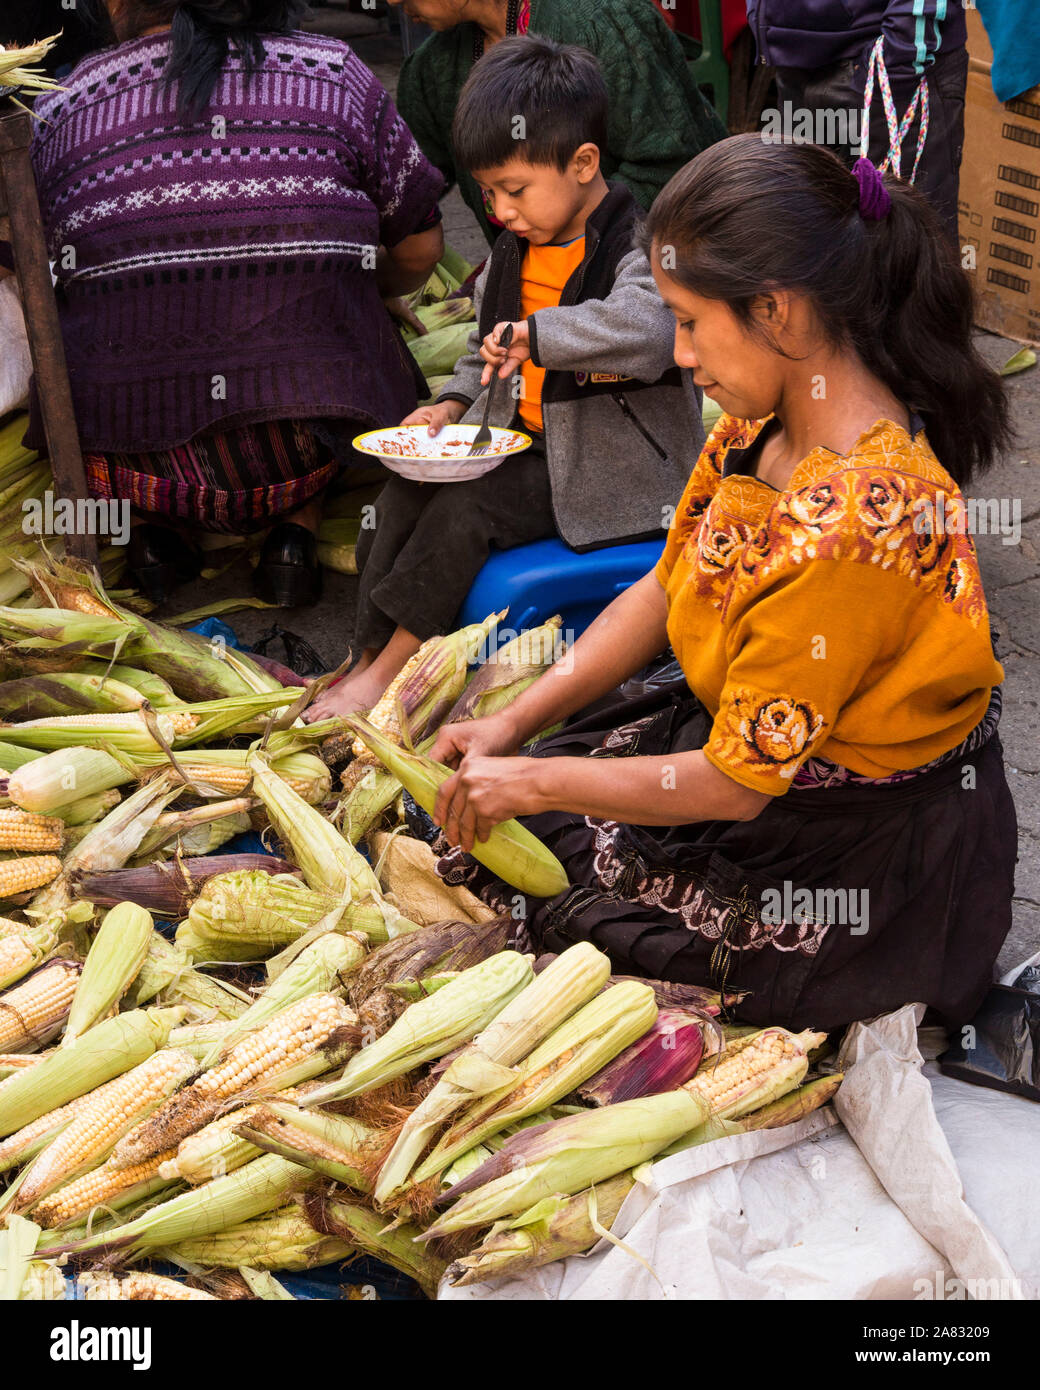 A woman husks corn at the market in Chichicastenango, Guatemala while her young son eats.  The boy appears to be about 4 years old. Stock Photo